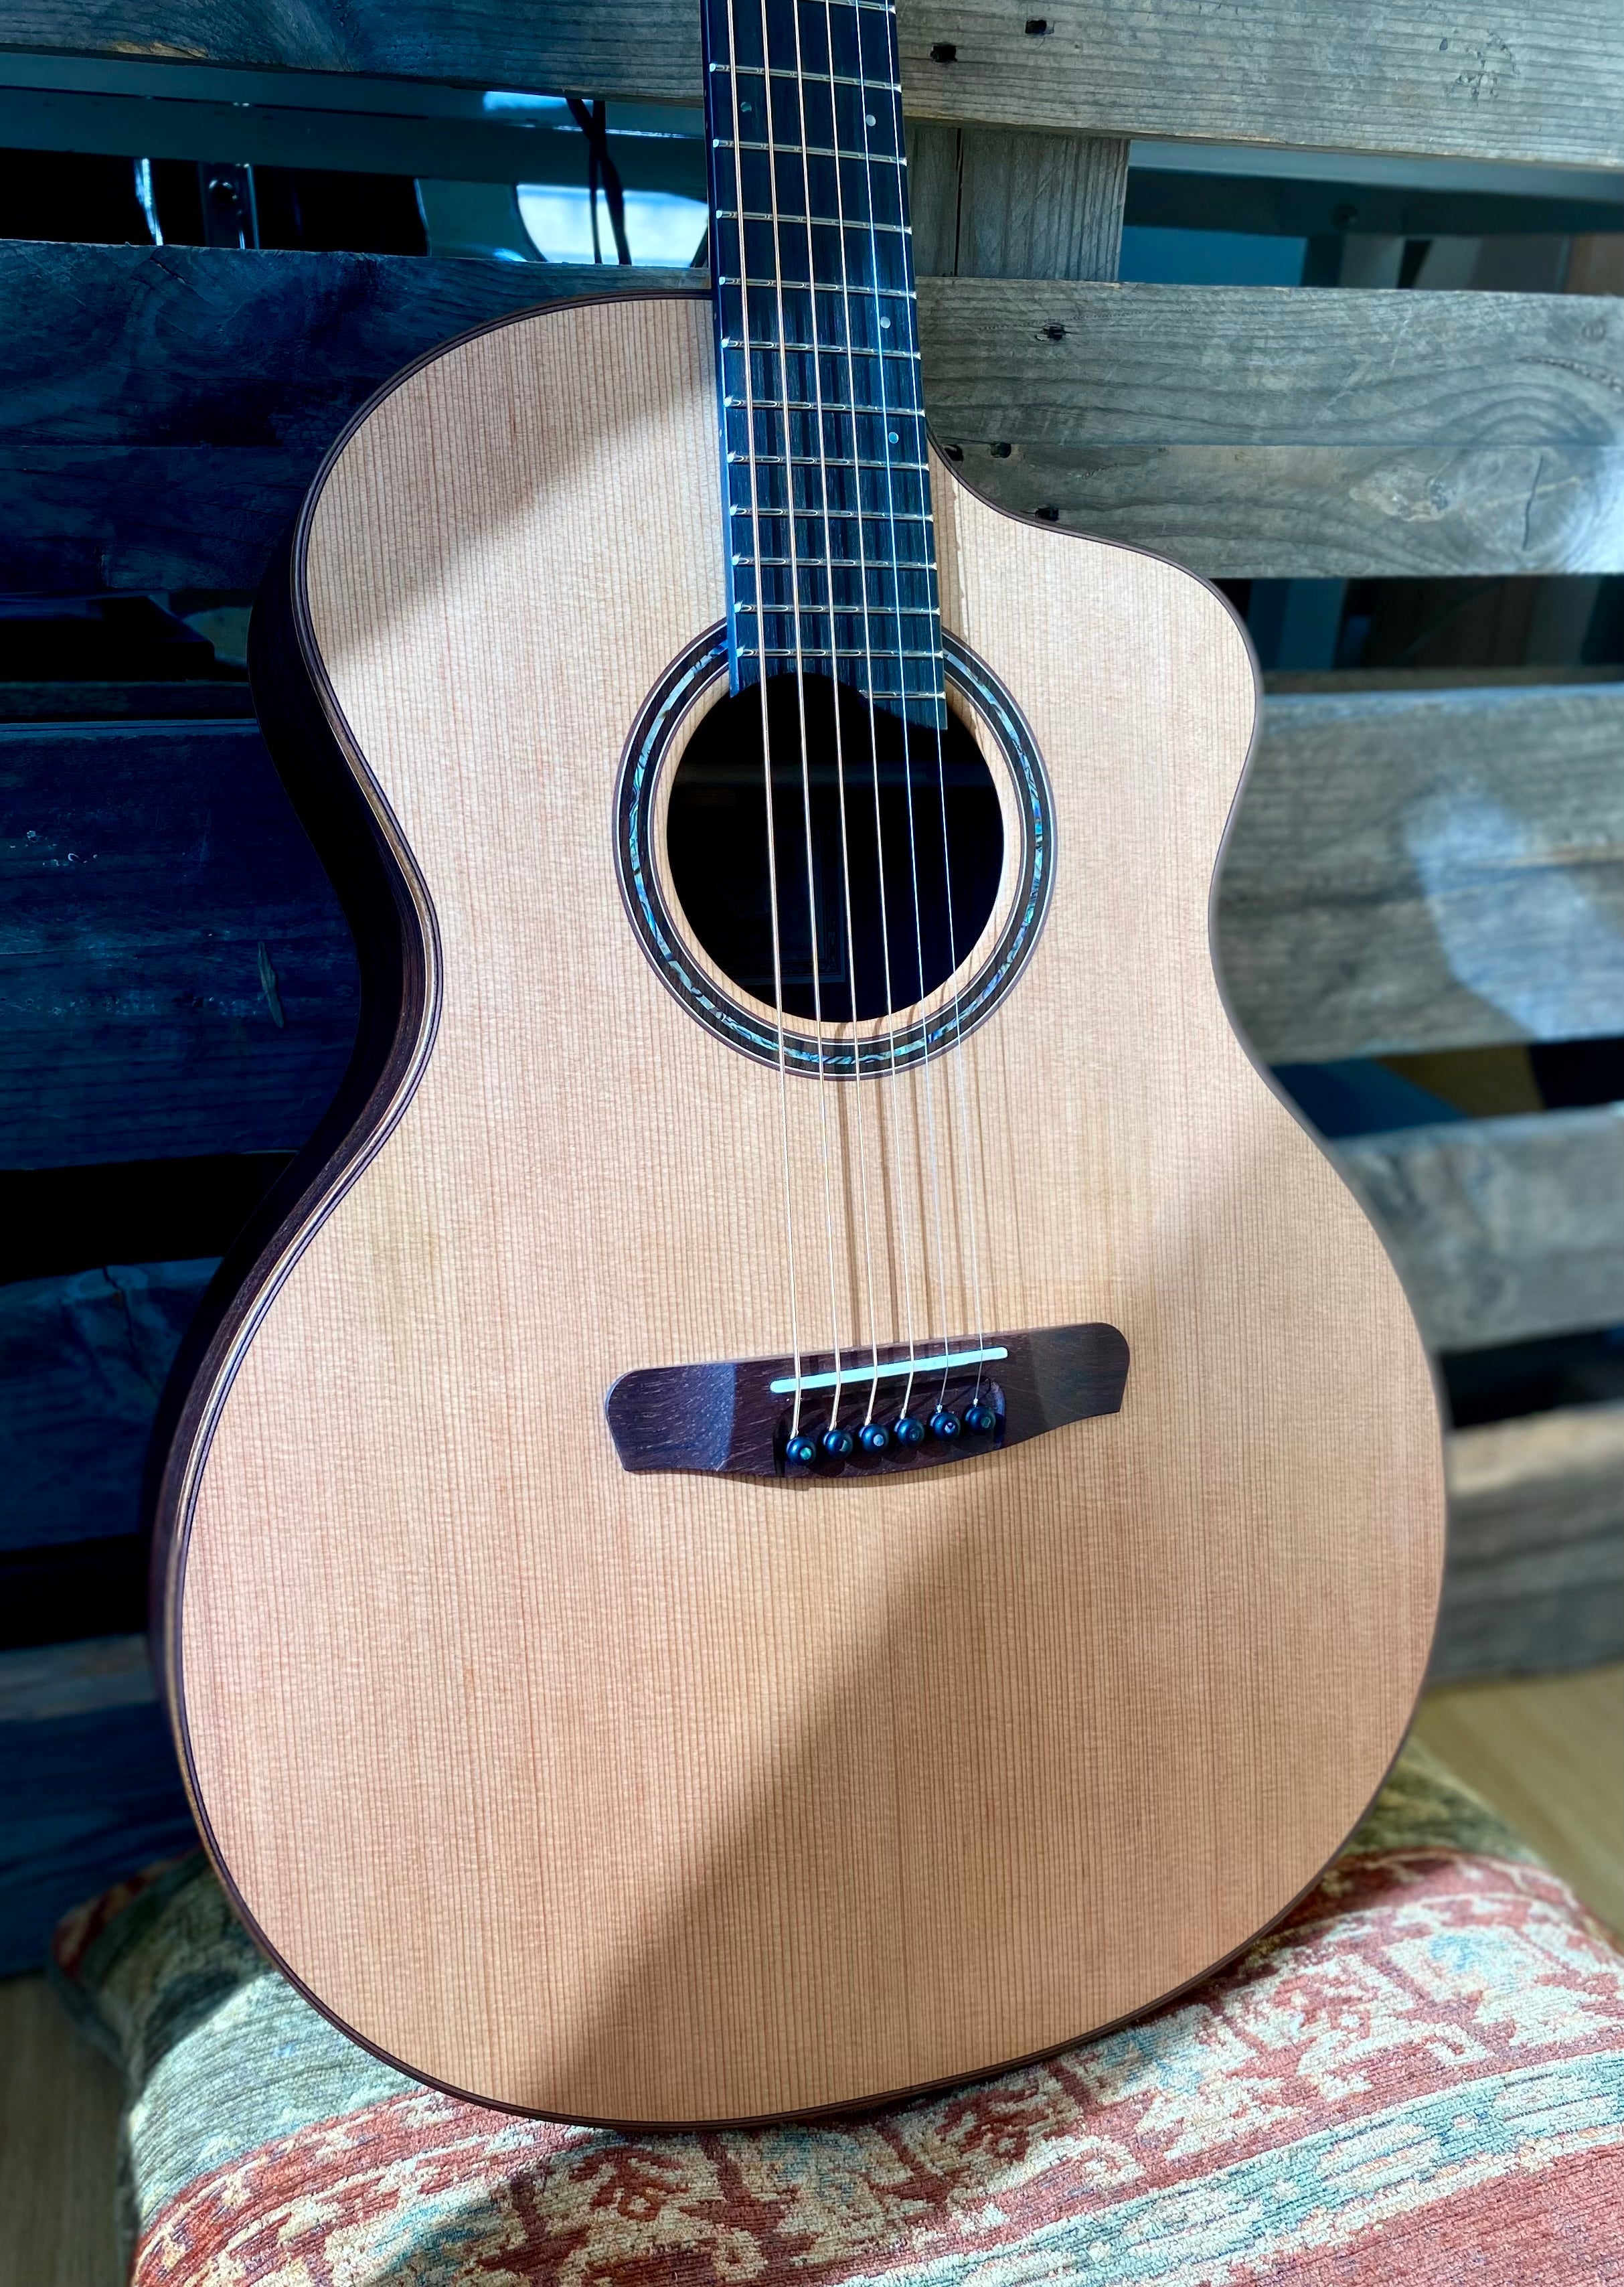 Dowina Rosewood GAC Deluxe With Torrified Swiss Moon Spruce, Acoustic Guitar for sale at Richards Guitars.